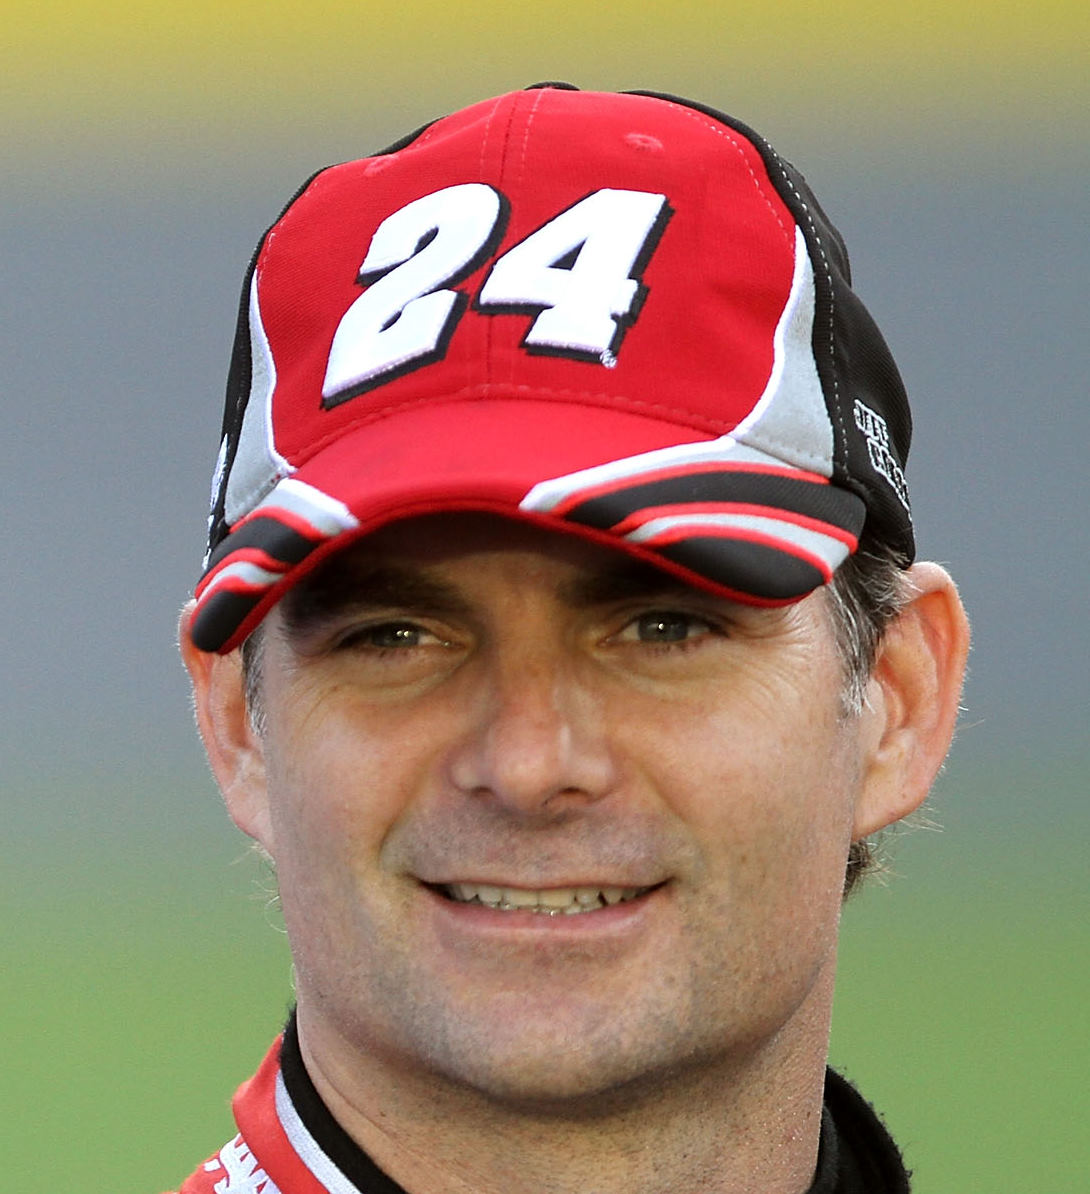 Who is the next Jeff Gordon and Dale Earnhardt Jr.?